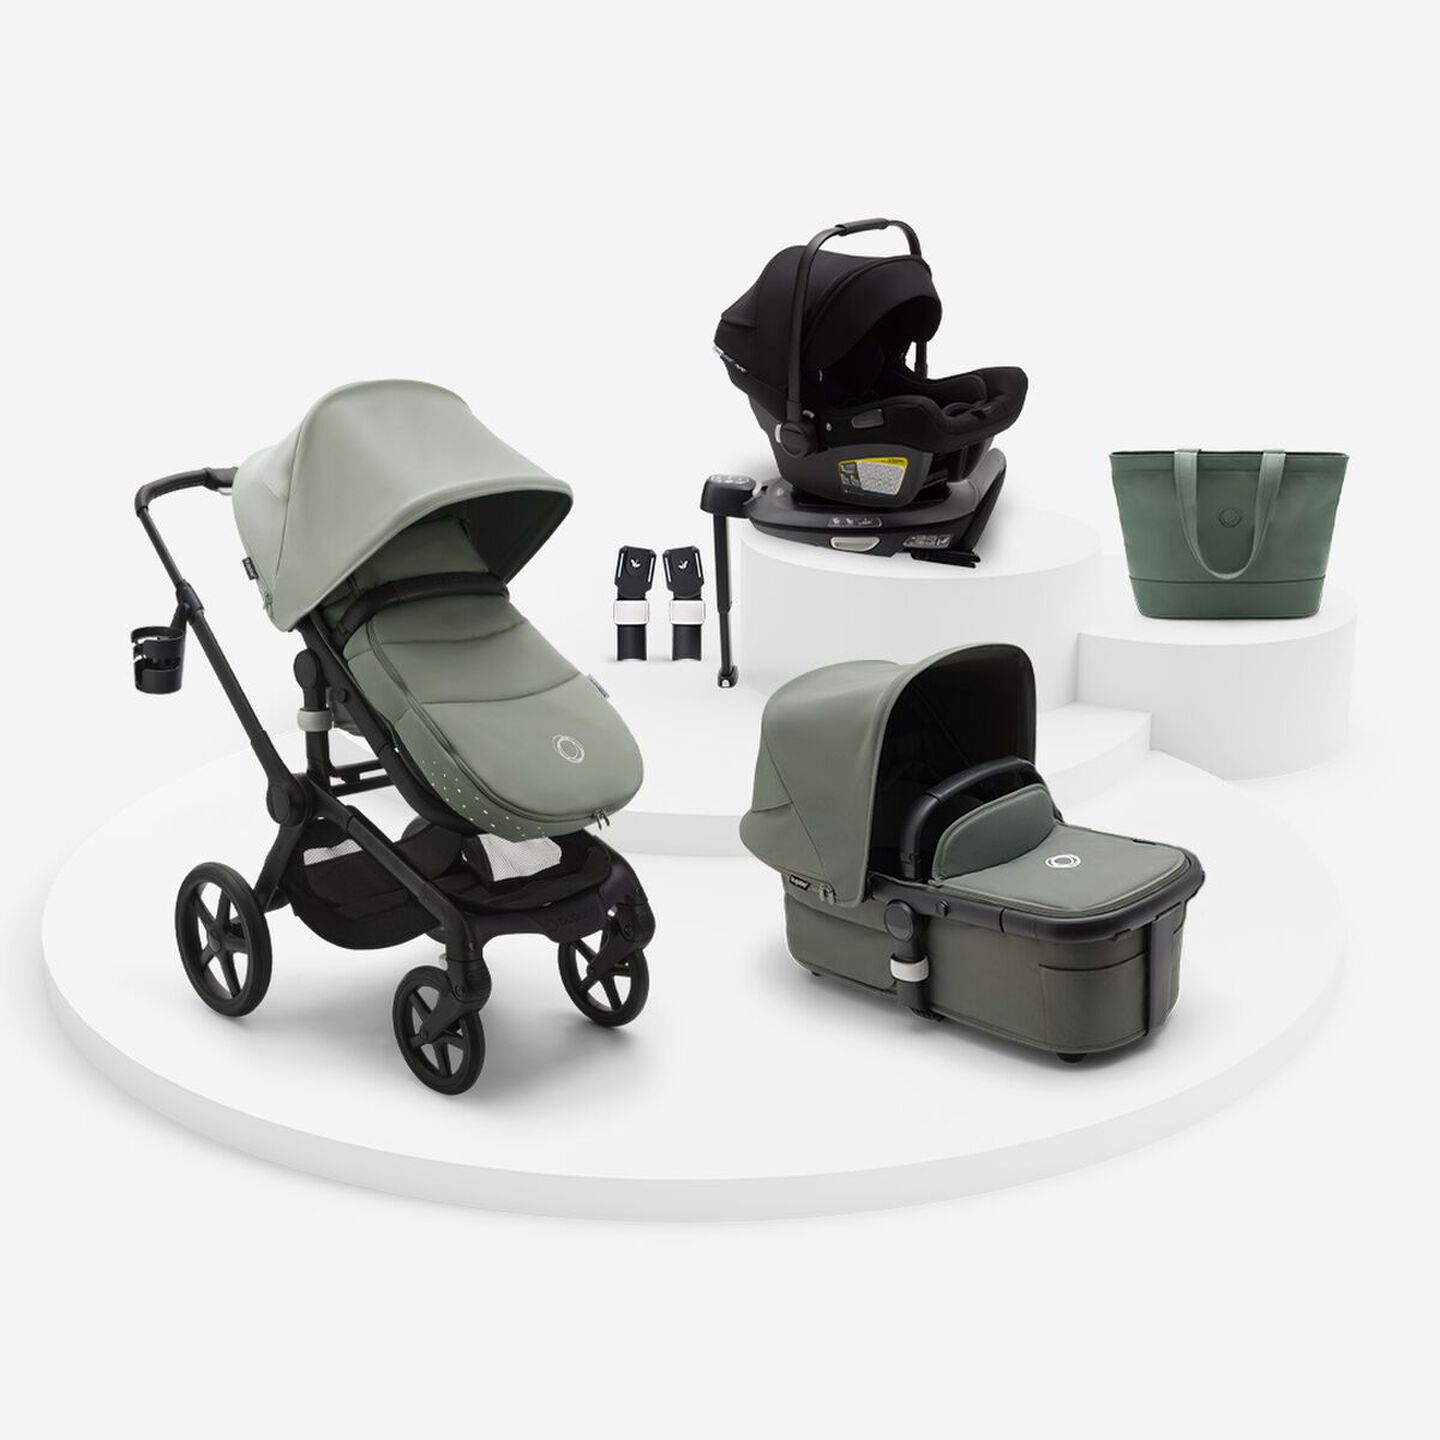 Bugaboo Dragonfly Bundle with footmuff and rain cover